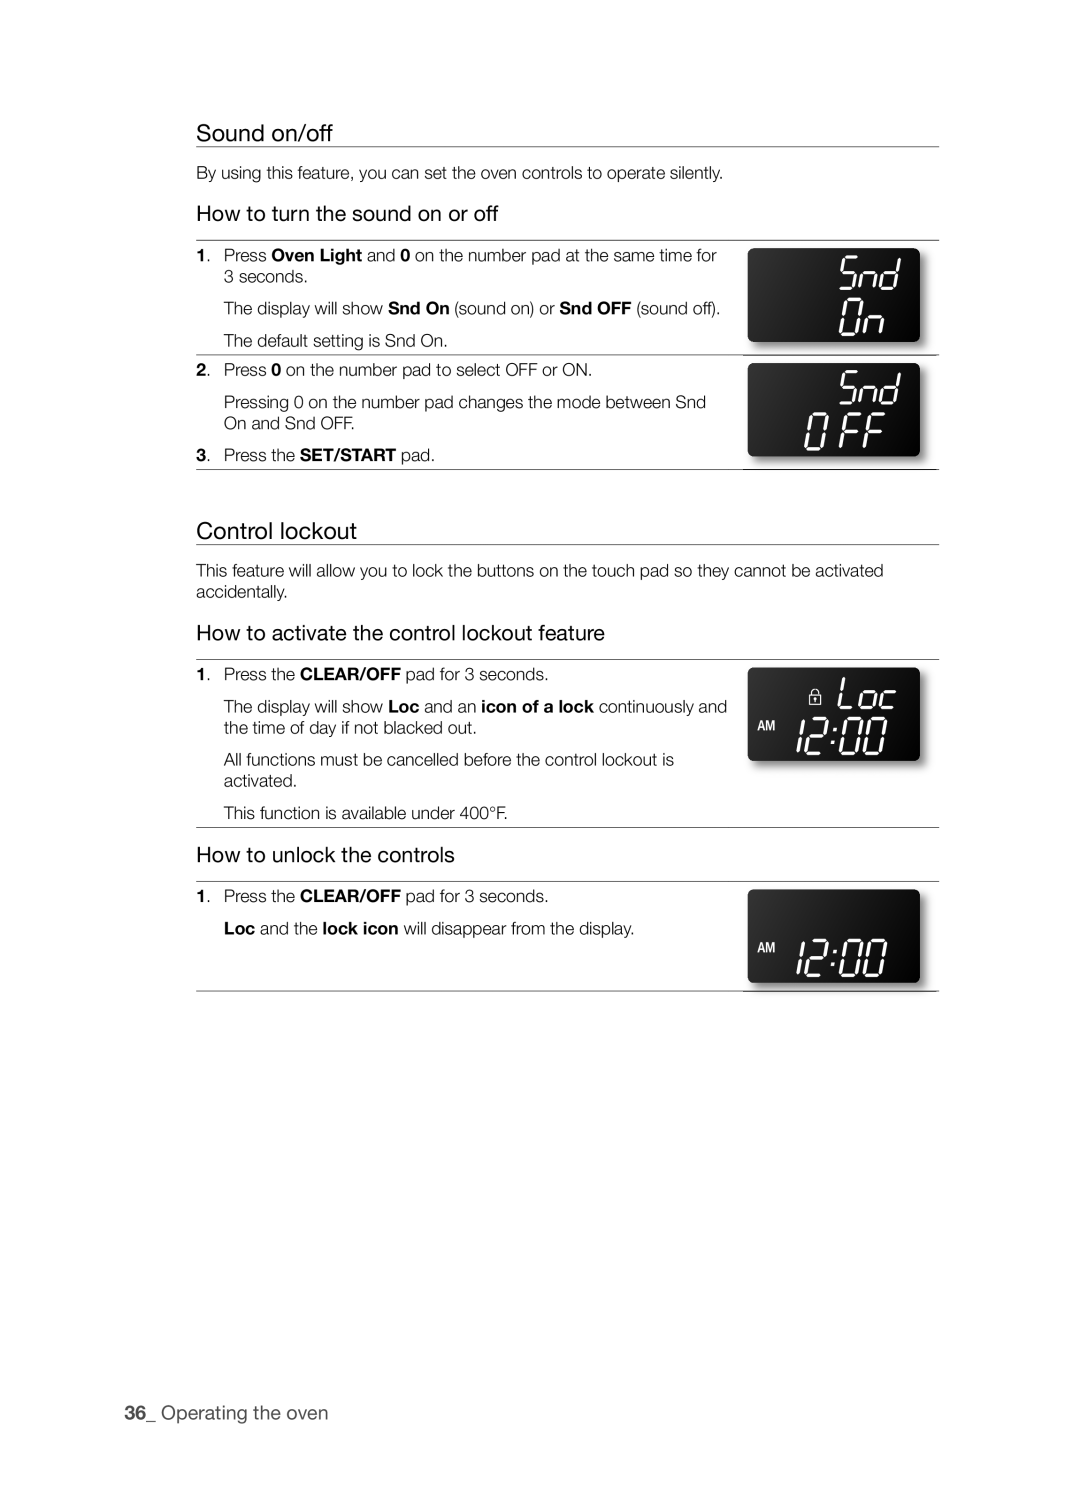 Samsung FTQ352IWX user manual Sound on/off, Control lockout, How to turn the sound on or off, How to unlock the controls 